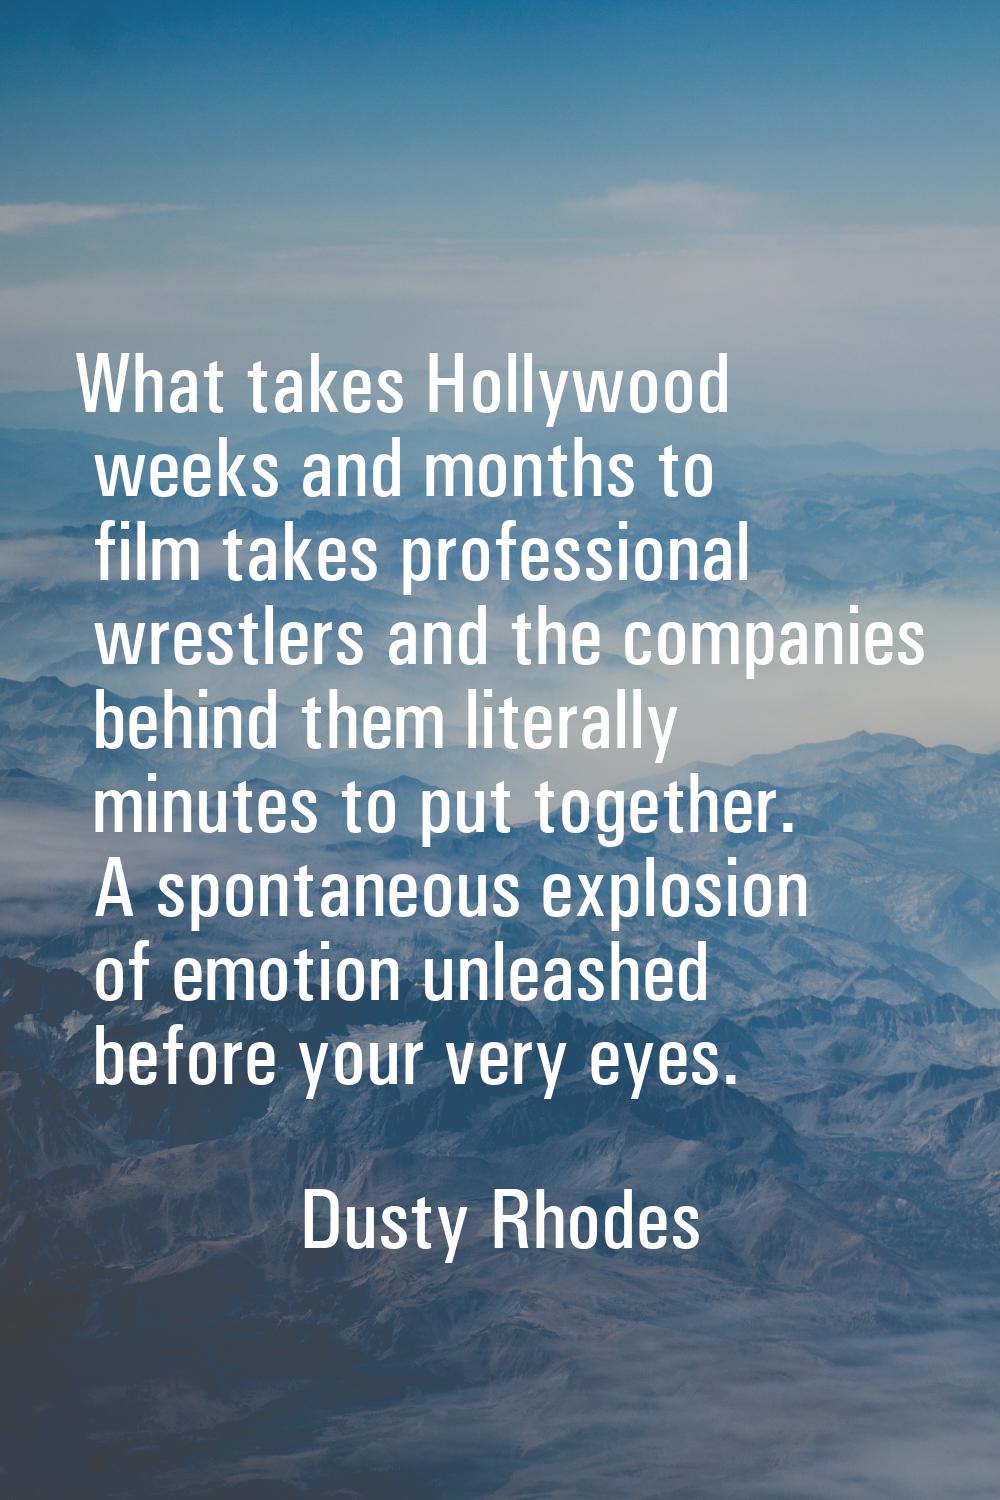 What takes Hollywood weeks and months to film takes professional wrestlers and the companies behind